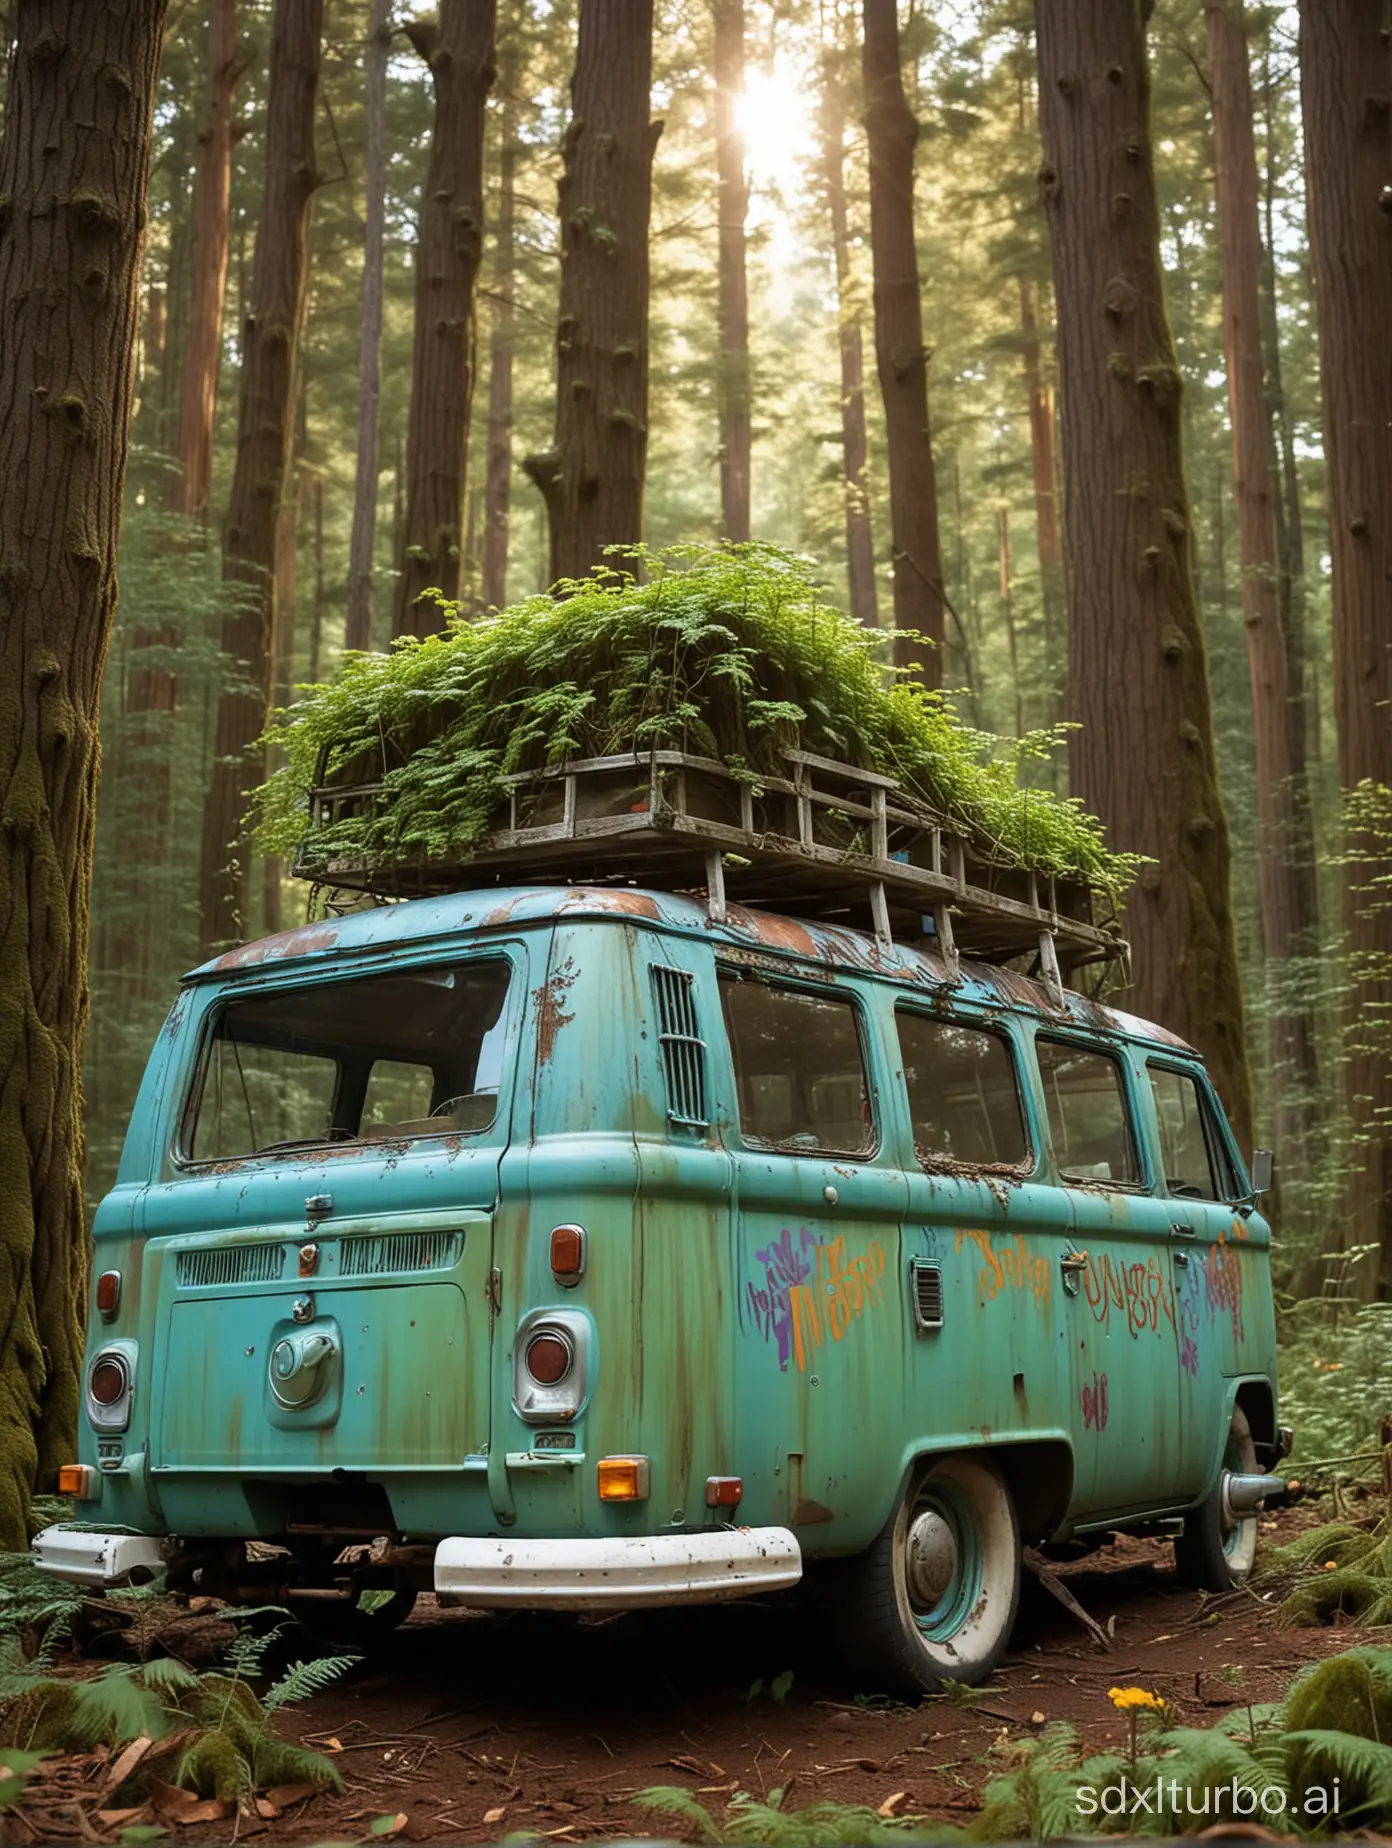 Adam Pankow Realistic image of a rusting the mystery machine van from scooby doo in the woods. The windows are smashed the vines and the forest are reclaiming the van. More shrooms and moss grow all around it. The light from the sun barely comes in through the thick dense canopy of the trees use 24mm focal length. Van should be a pale blue and resemble the van from scooby doo. Should say “mystery machine” on the side should have flowers painted on the side.